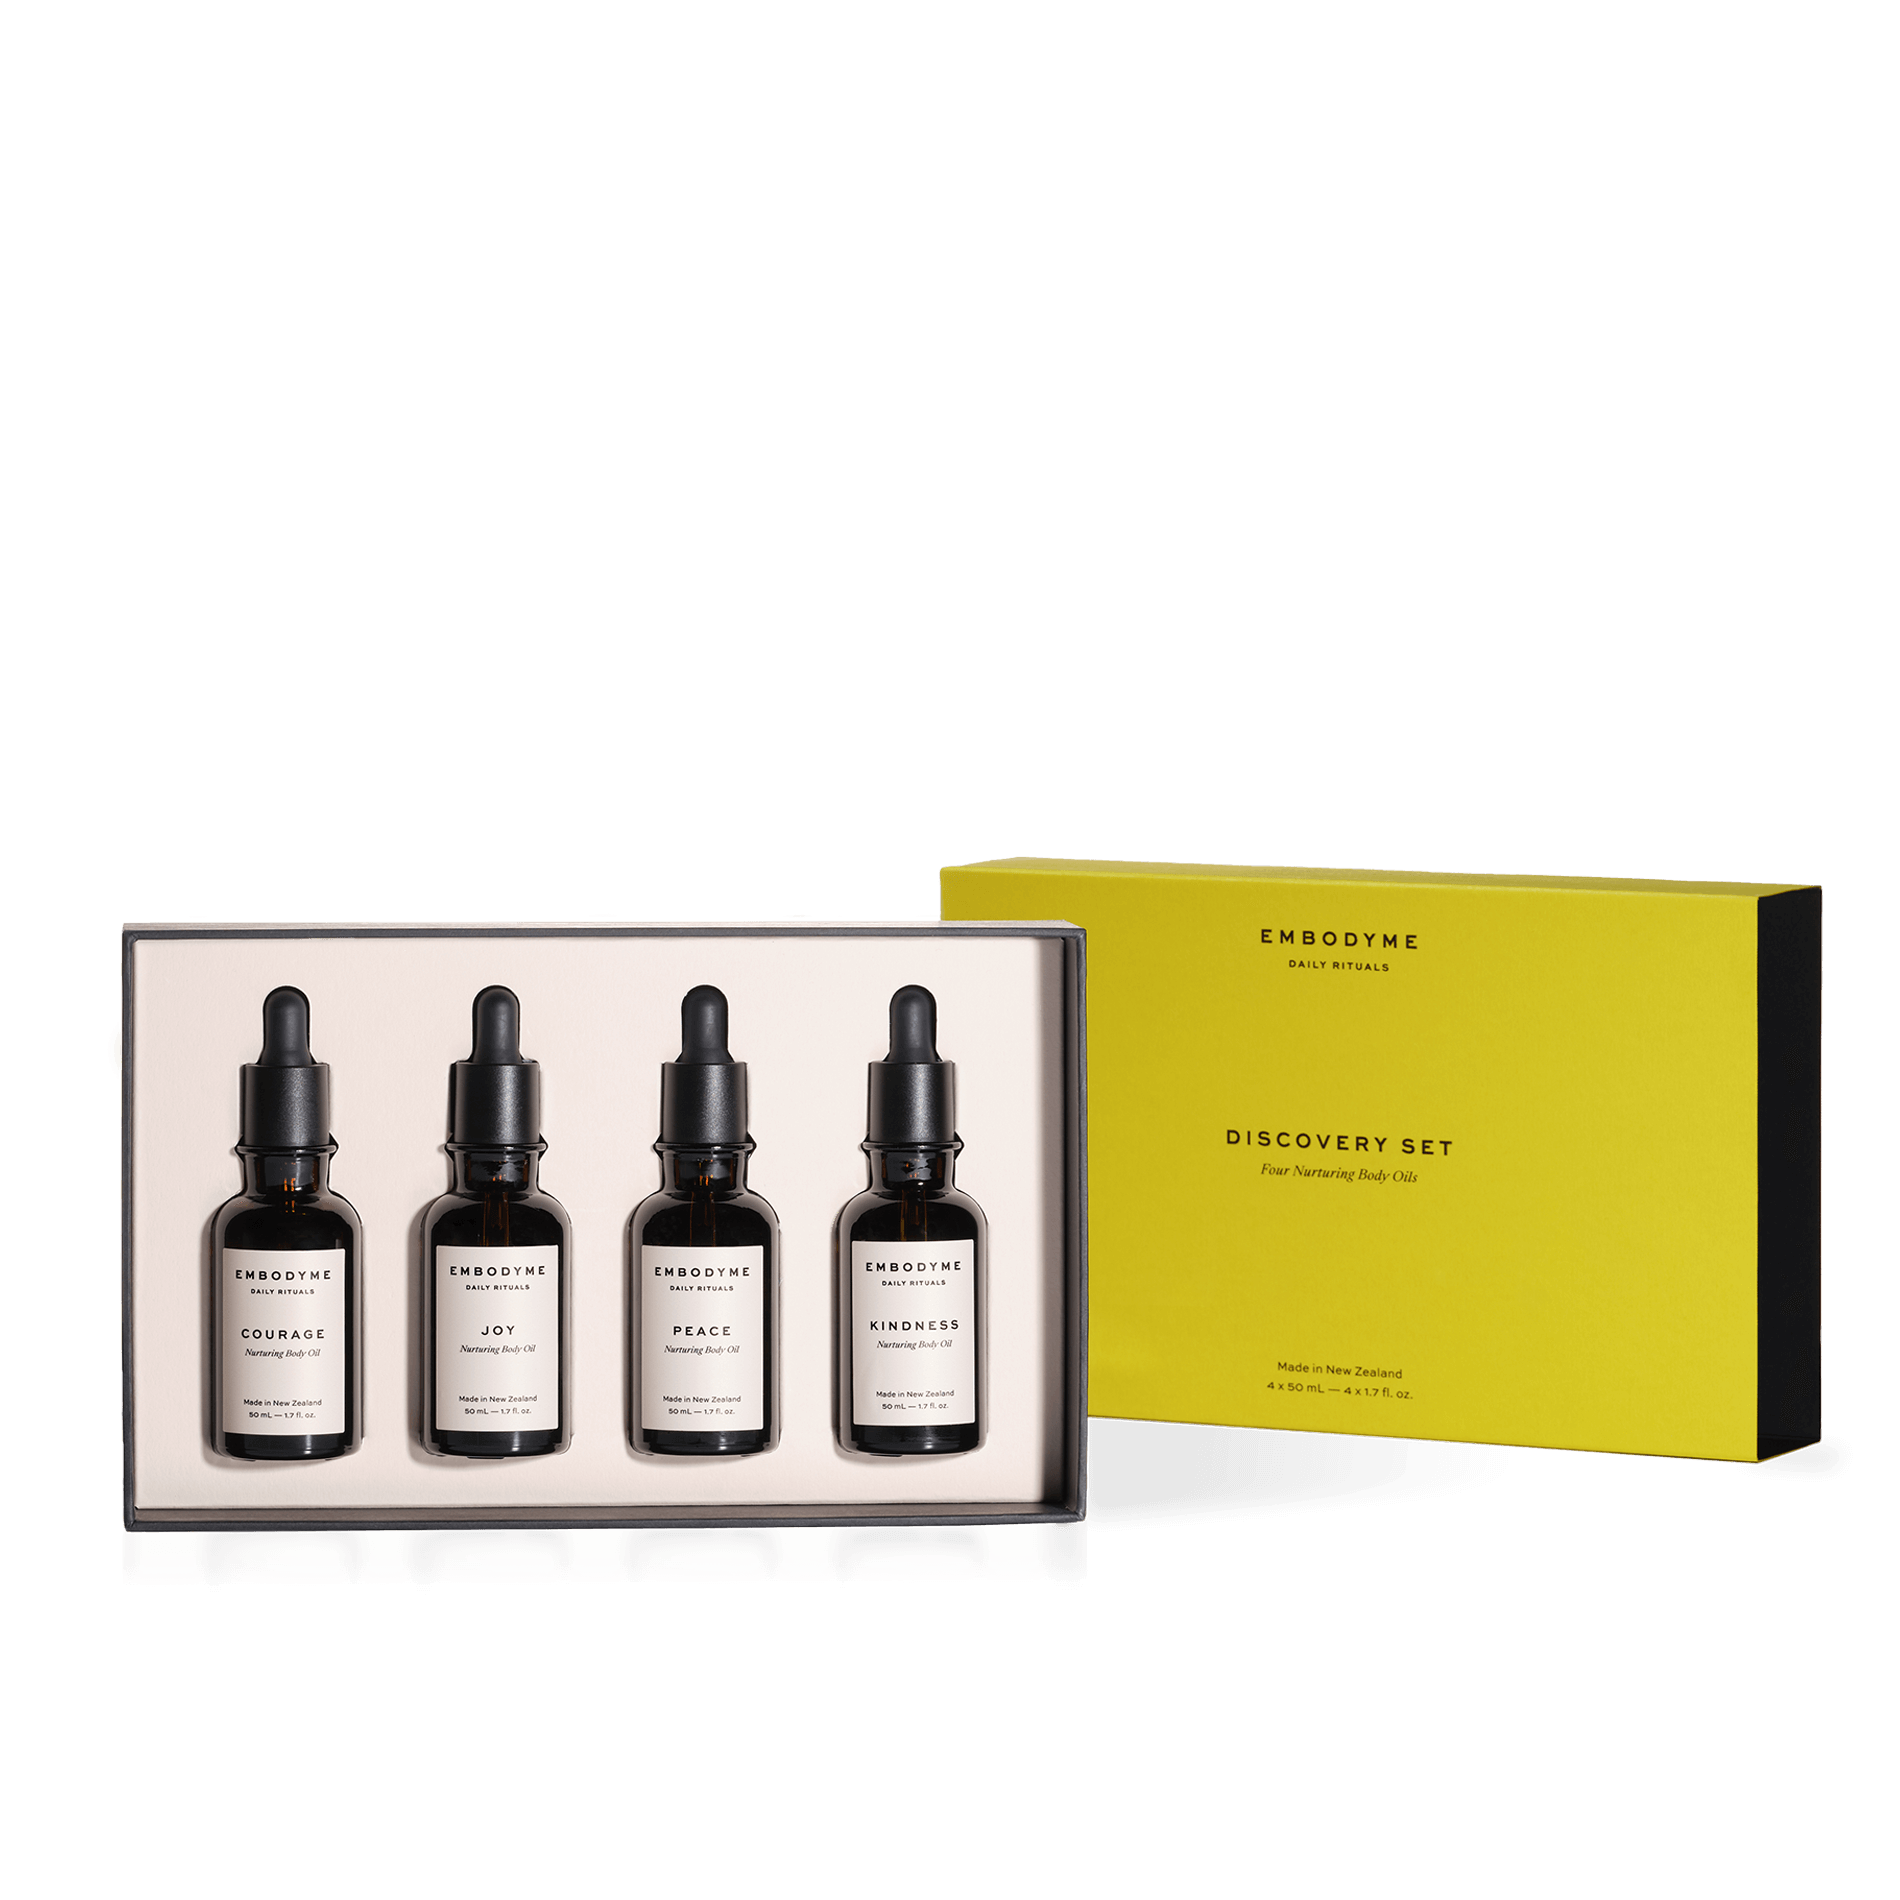 Embodyme Discovery Set – The Facialist